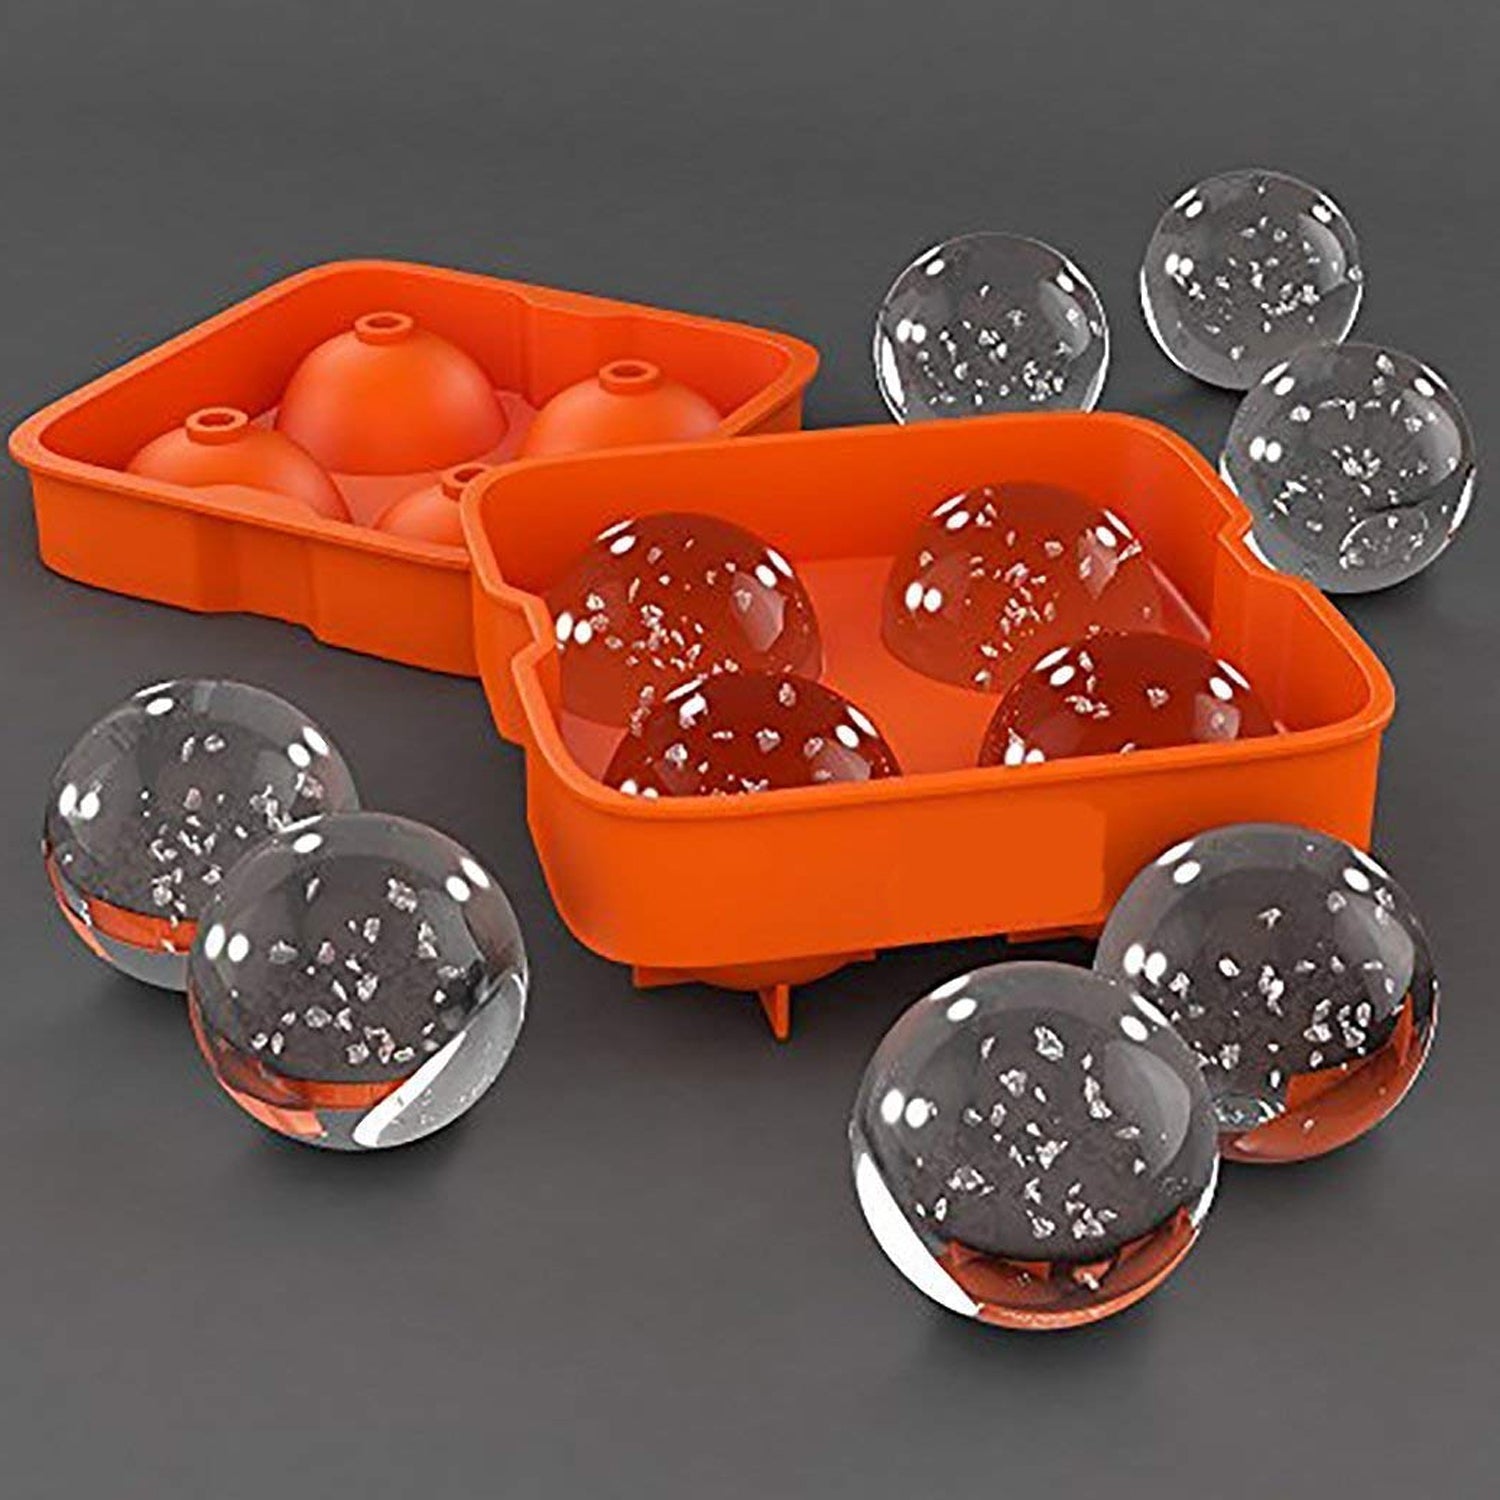 7164 Ice Trays for Freezer Whiskey Ice Cube Plastic Ball Maker Mold Sphere Mould 4 Holes New Ice Balls Party Brick Round Tray Bar Tool ice for Whiskey DeoDap